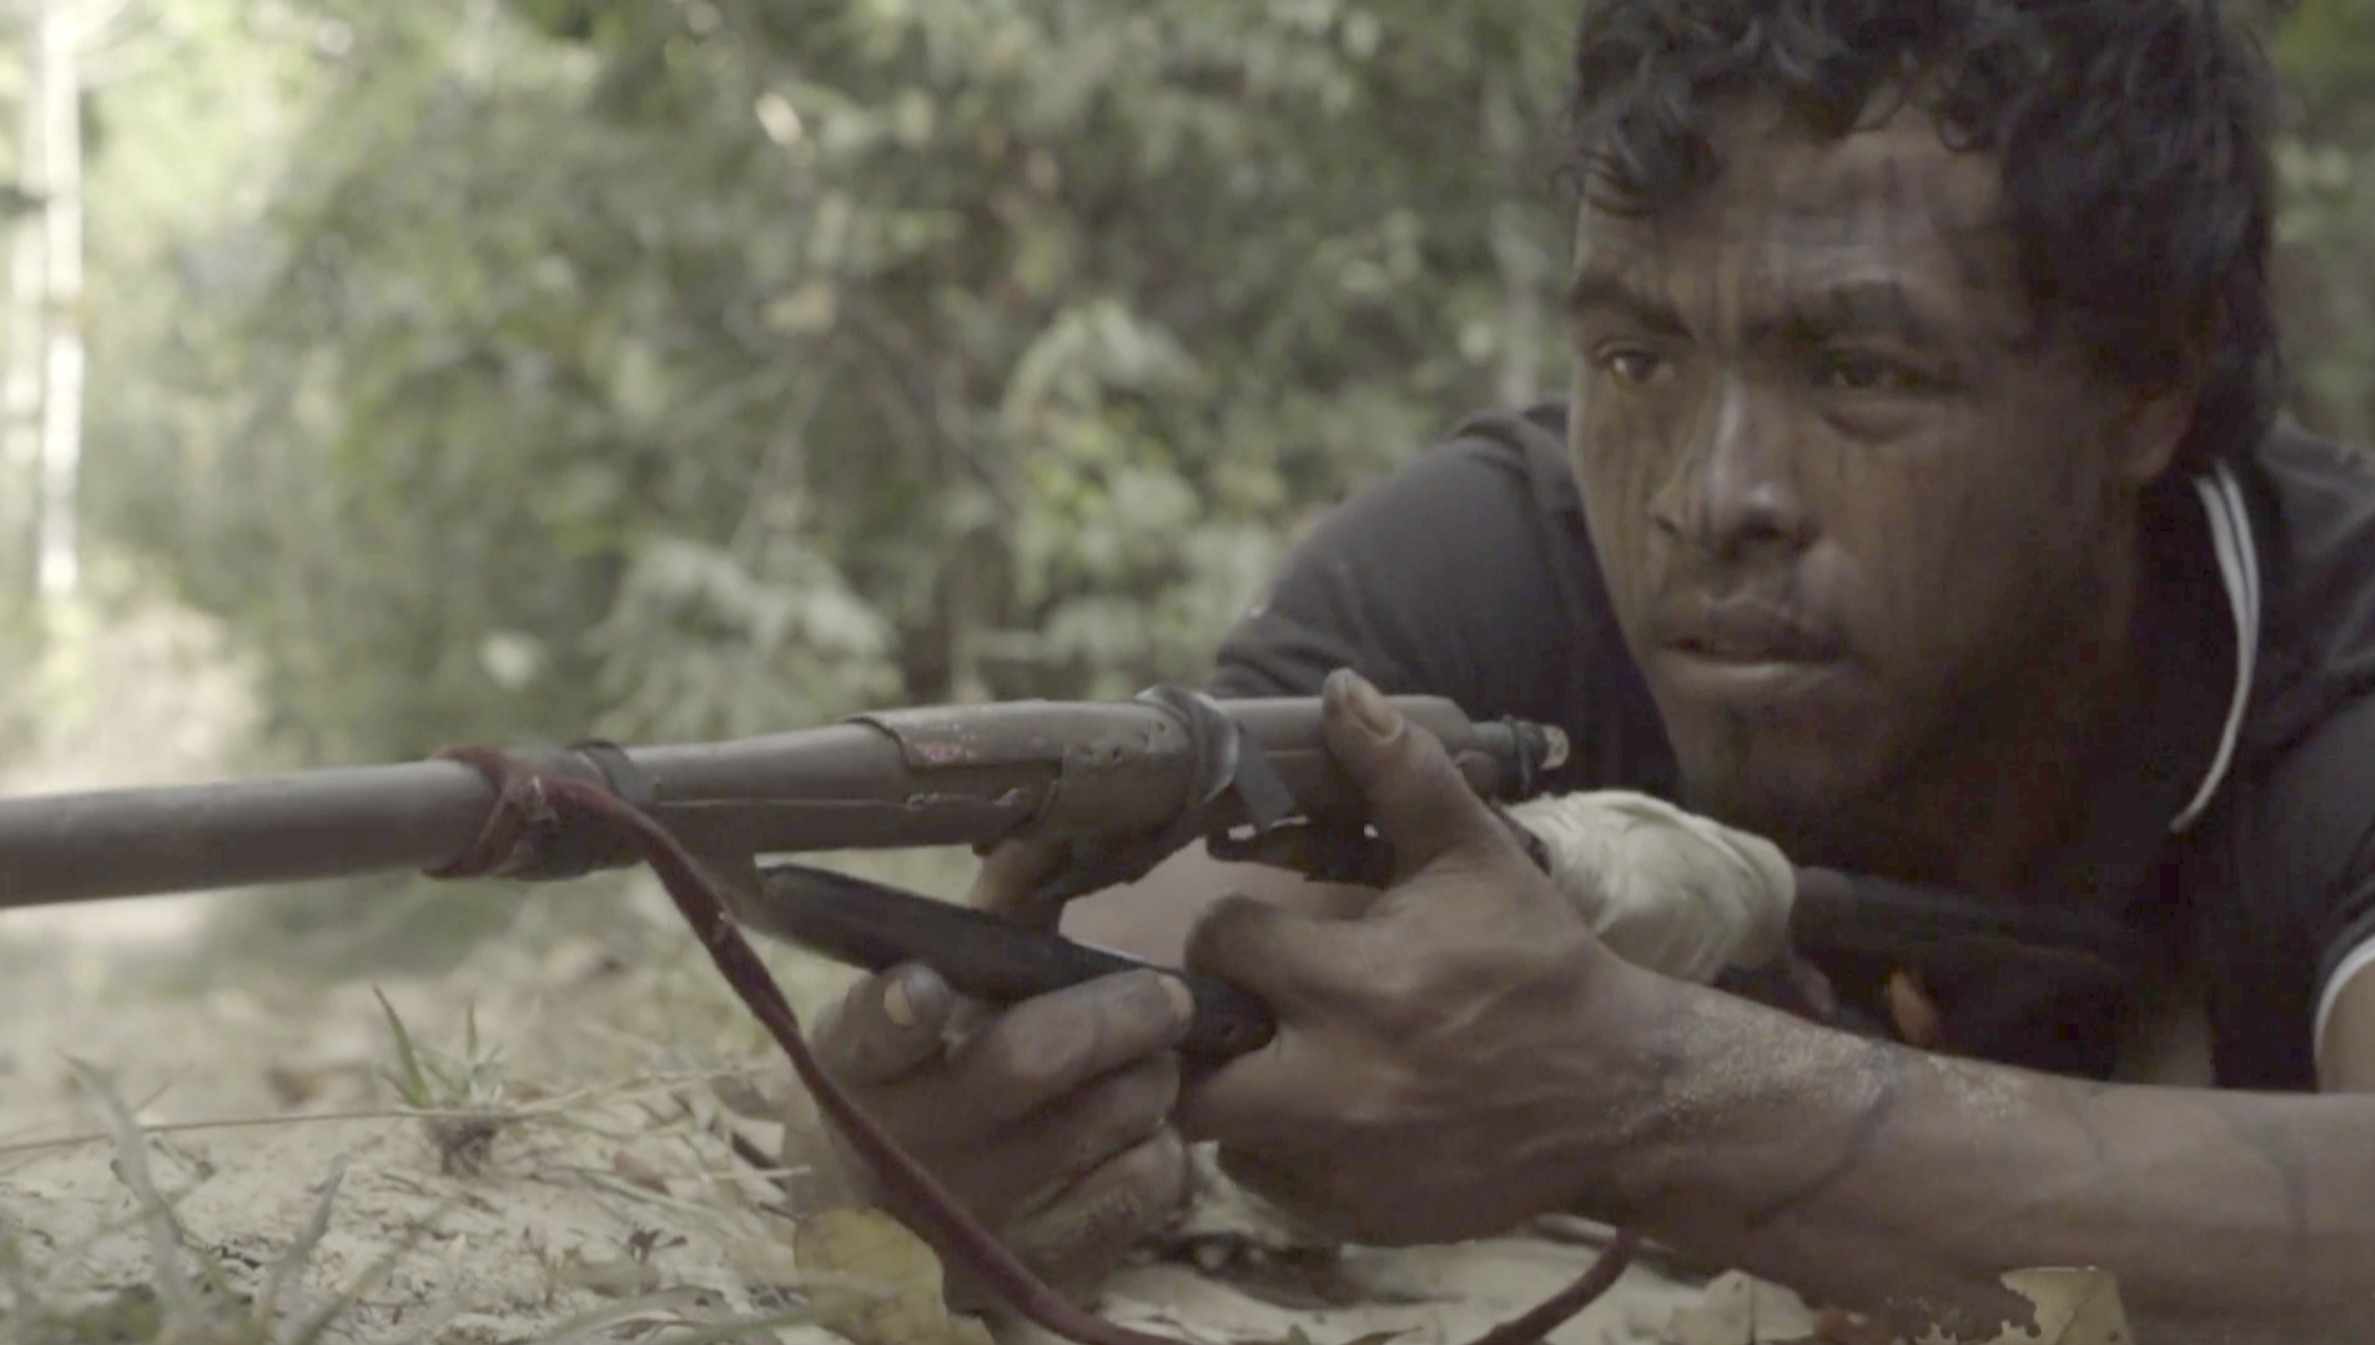 In this September 2019, video frame, Paulo Paulino Guajajara, a Forest Guardian protecting the Arariboia indigenous reserve poses with his makeshift weapon, at the reserve in Maranhao state, Brazil. He was killed in an ambush by illegal loggers on  November 1, 2019